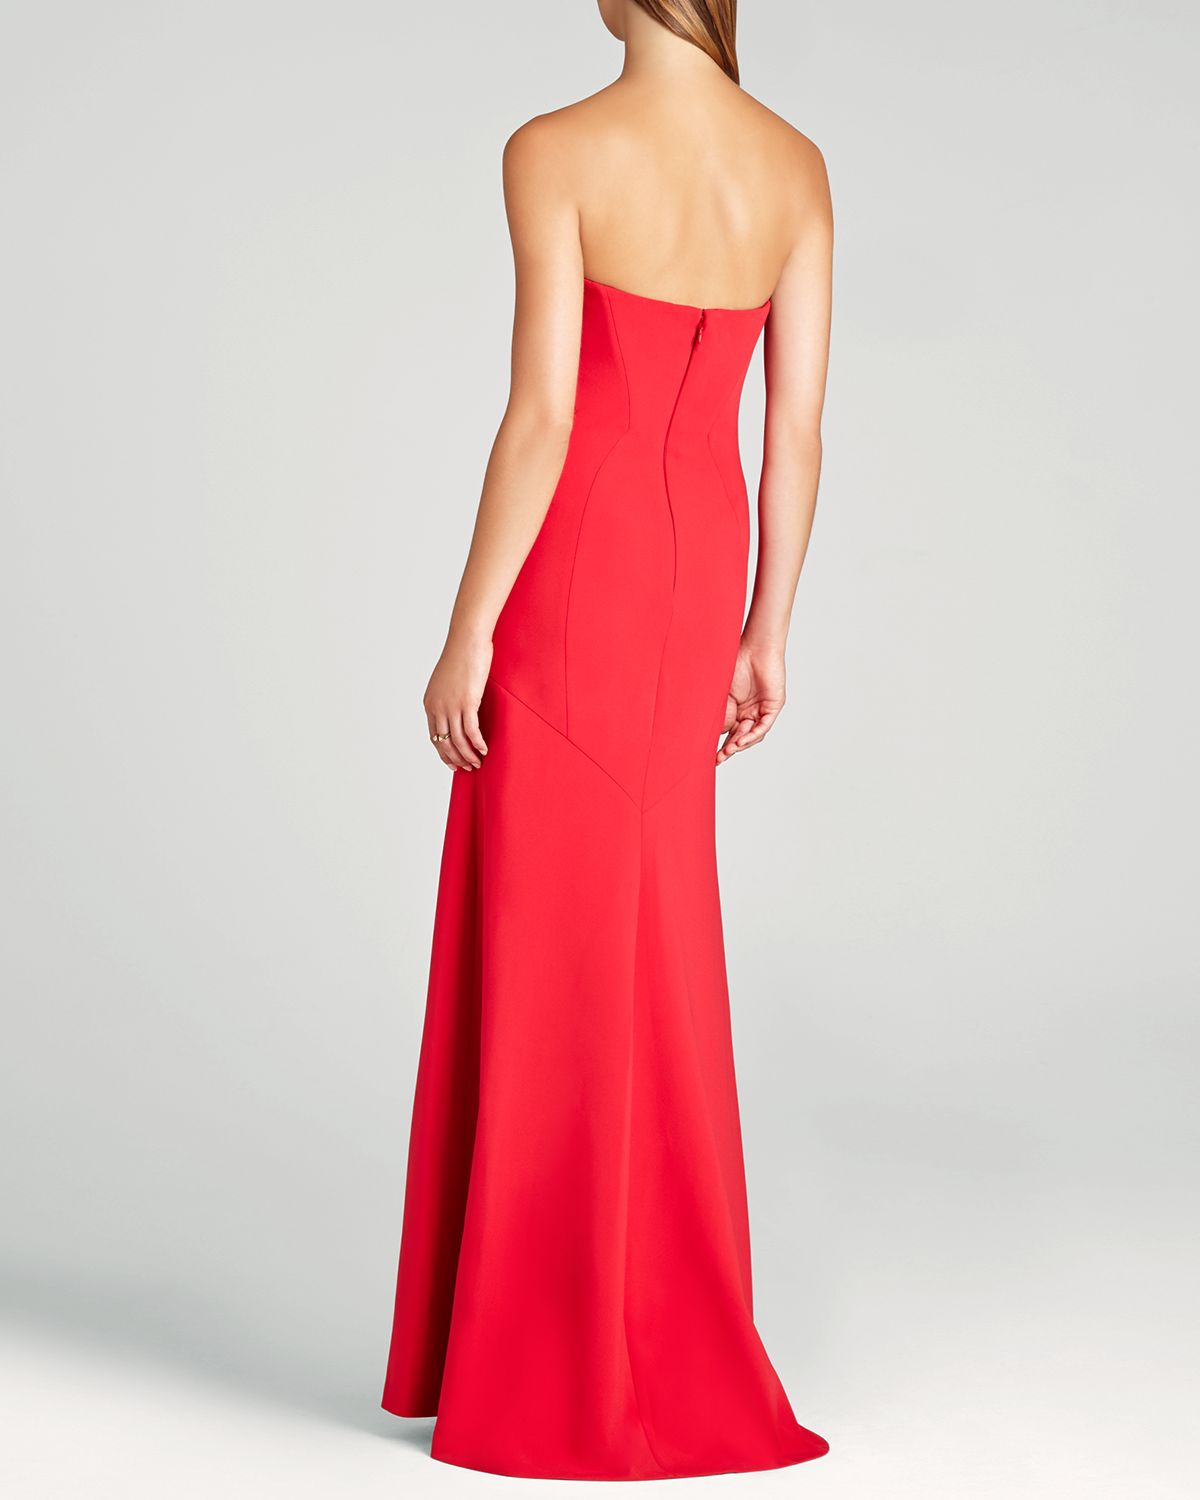 BCBGMAXAZRIA Surrey Strapless Gown - Bloomingdale's Exclusive in Red - Lyst